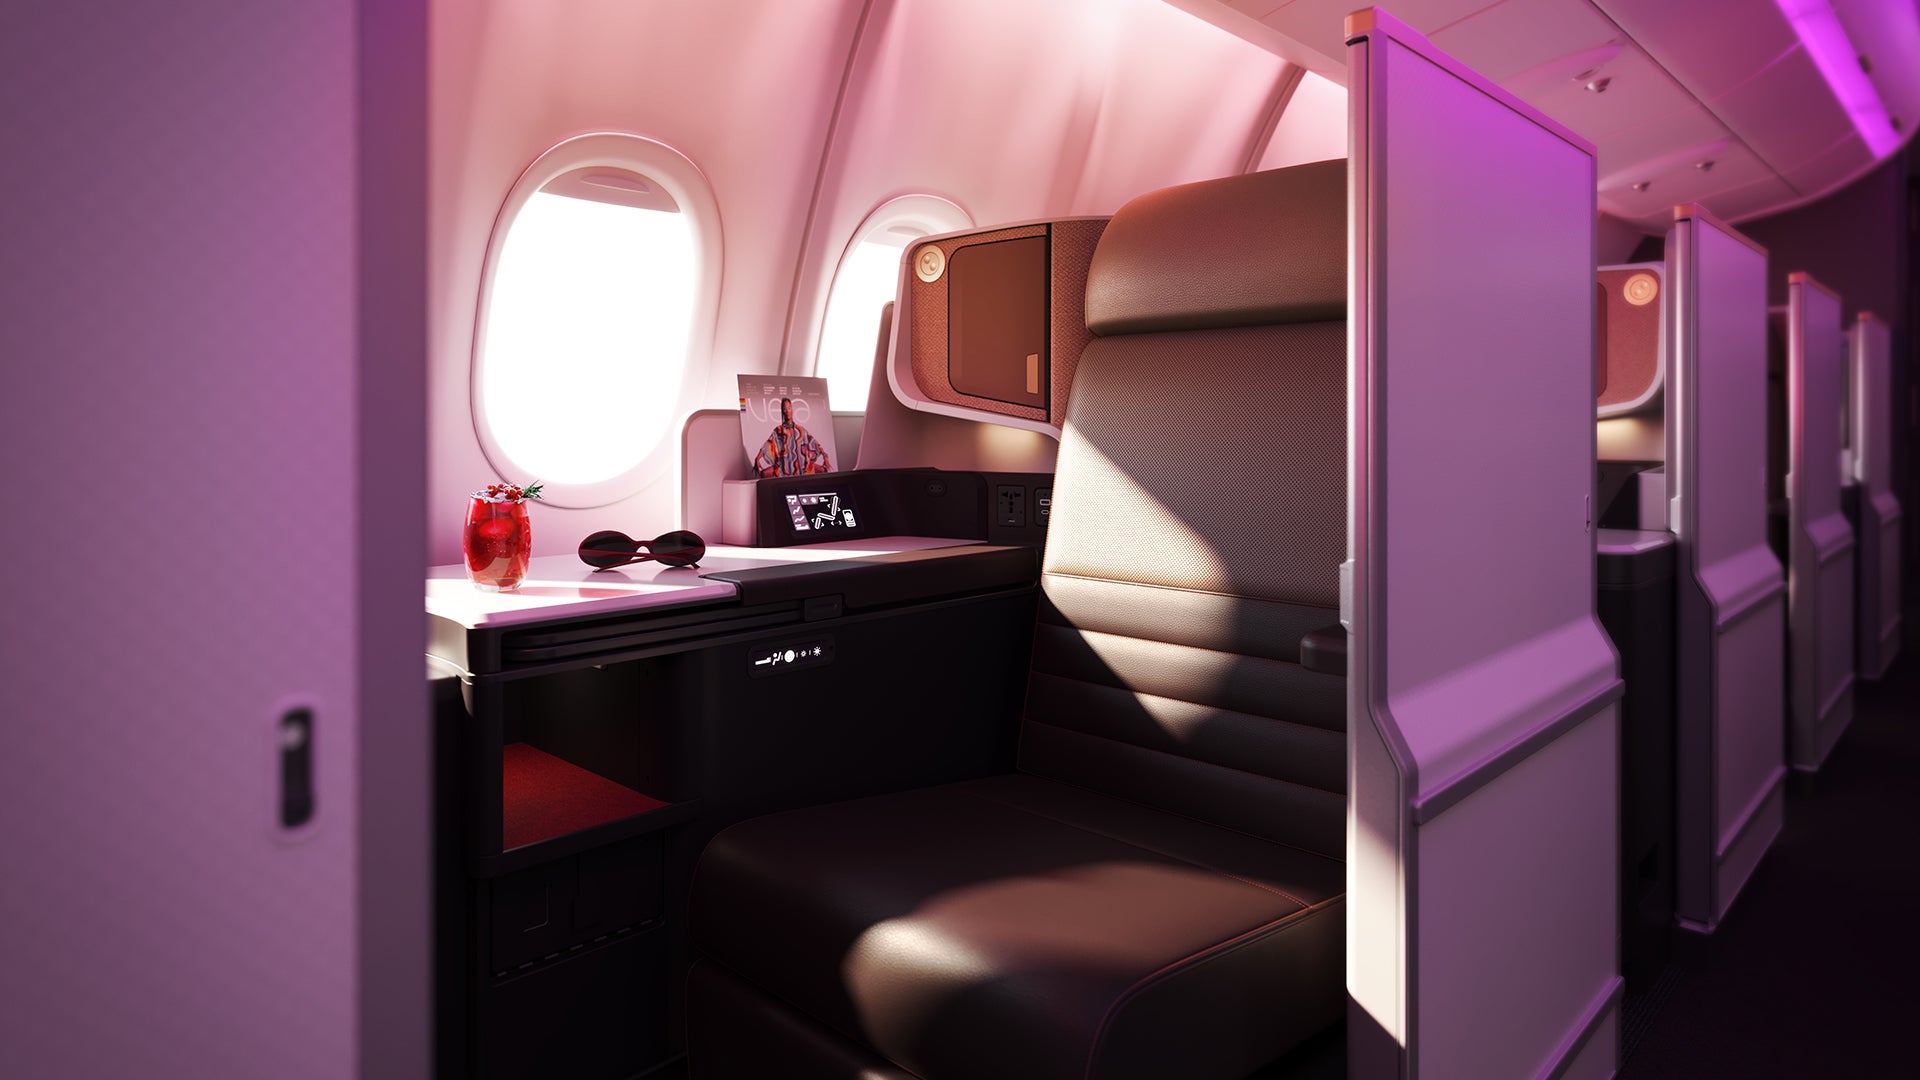 You are currently viewing The redemption deal of the year: 50% off all Virgin Atlantic flights to the US and Caribbean